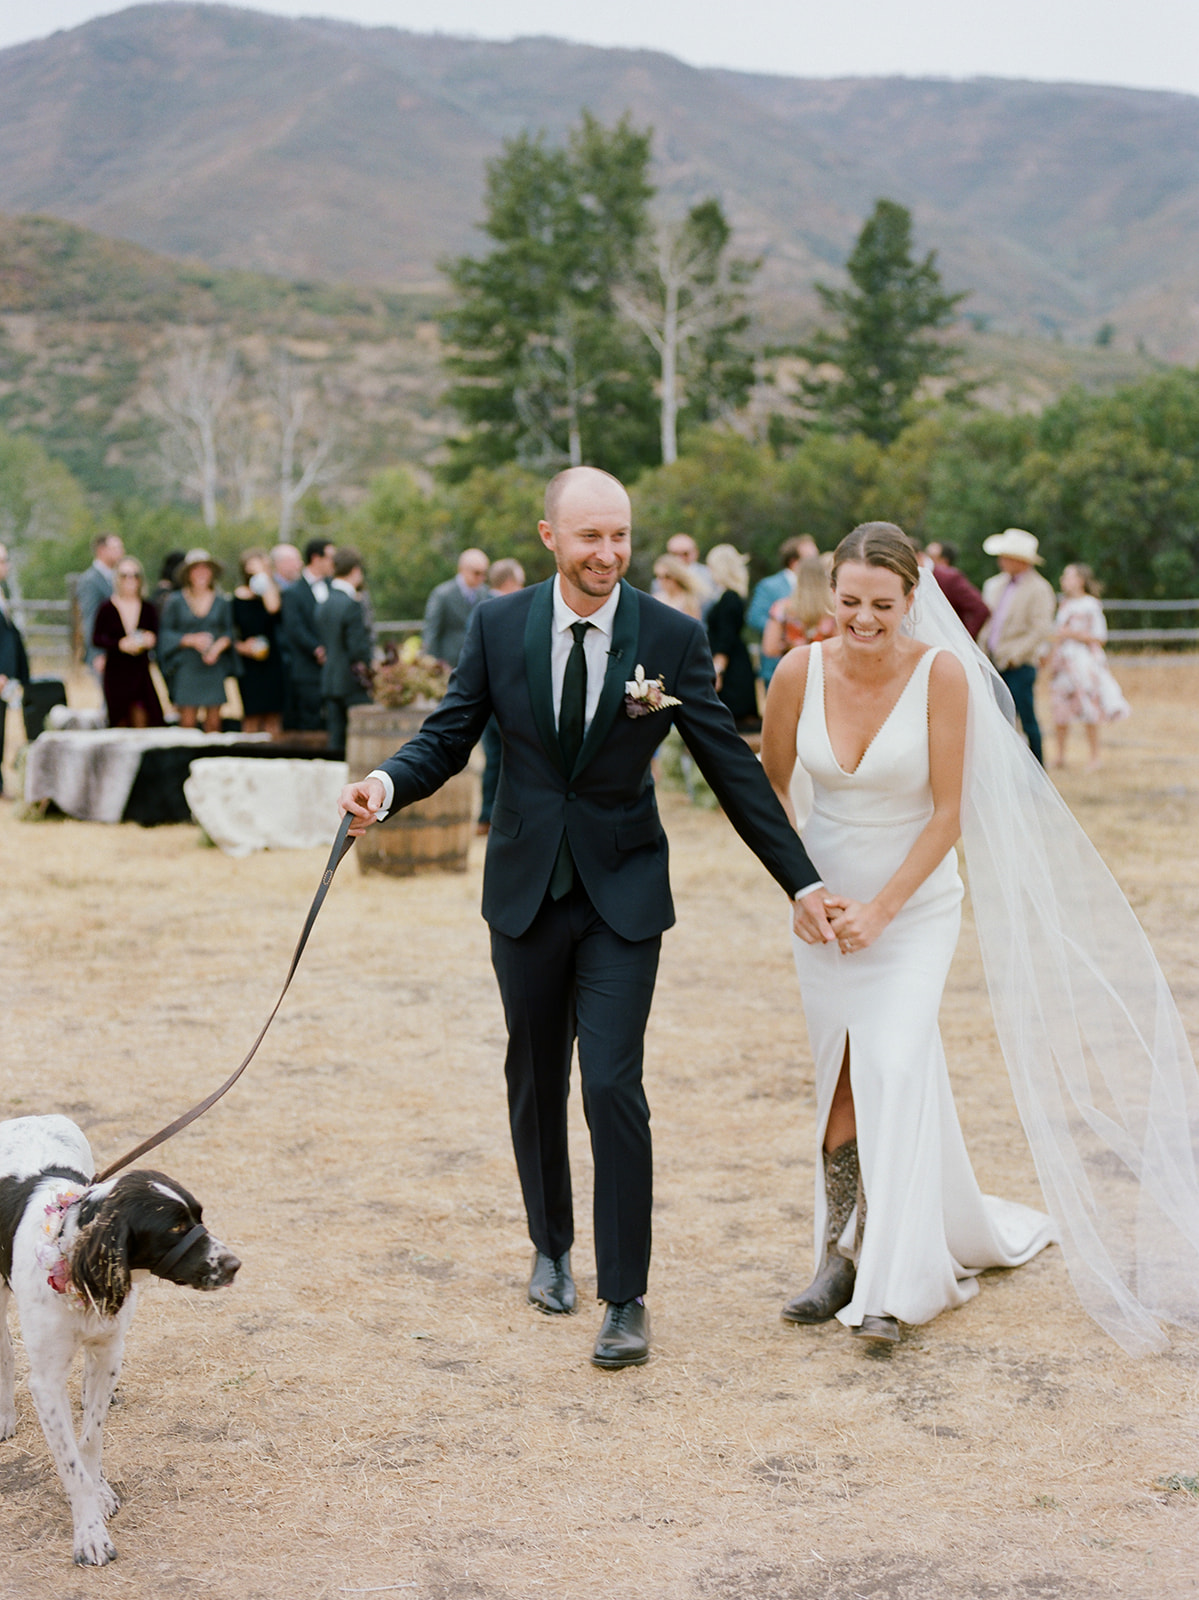 a rustic modern wedding in the high mountains of Utah. The bride is a caucasian female wearing a white crepe fabric wedding dress.